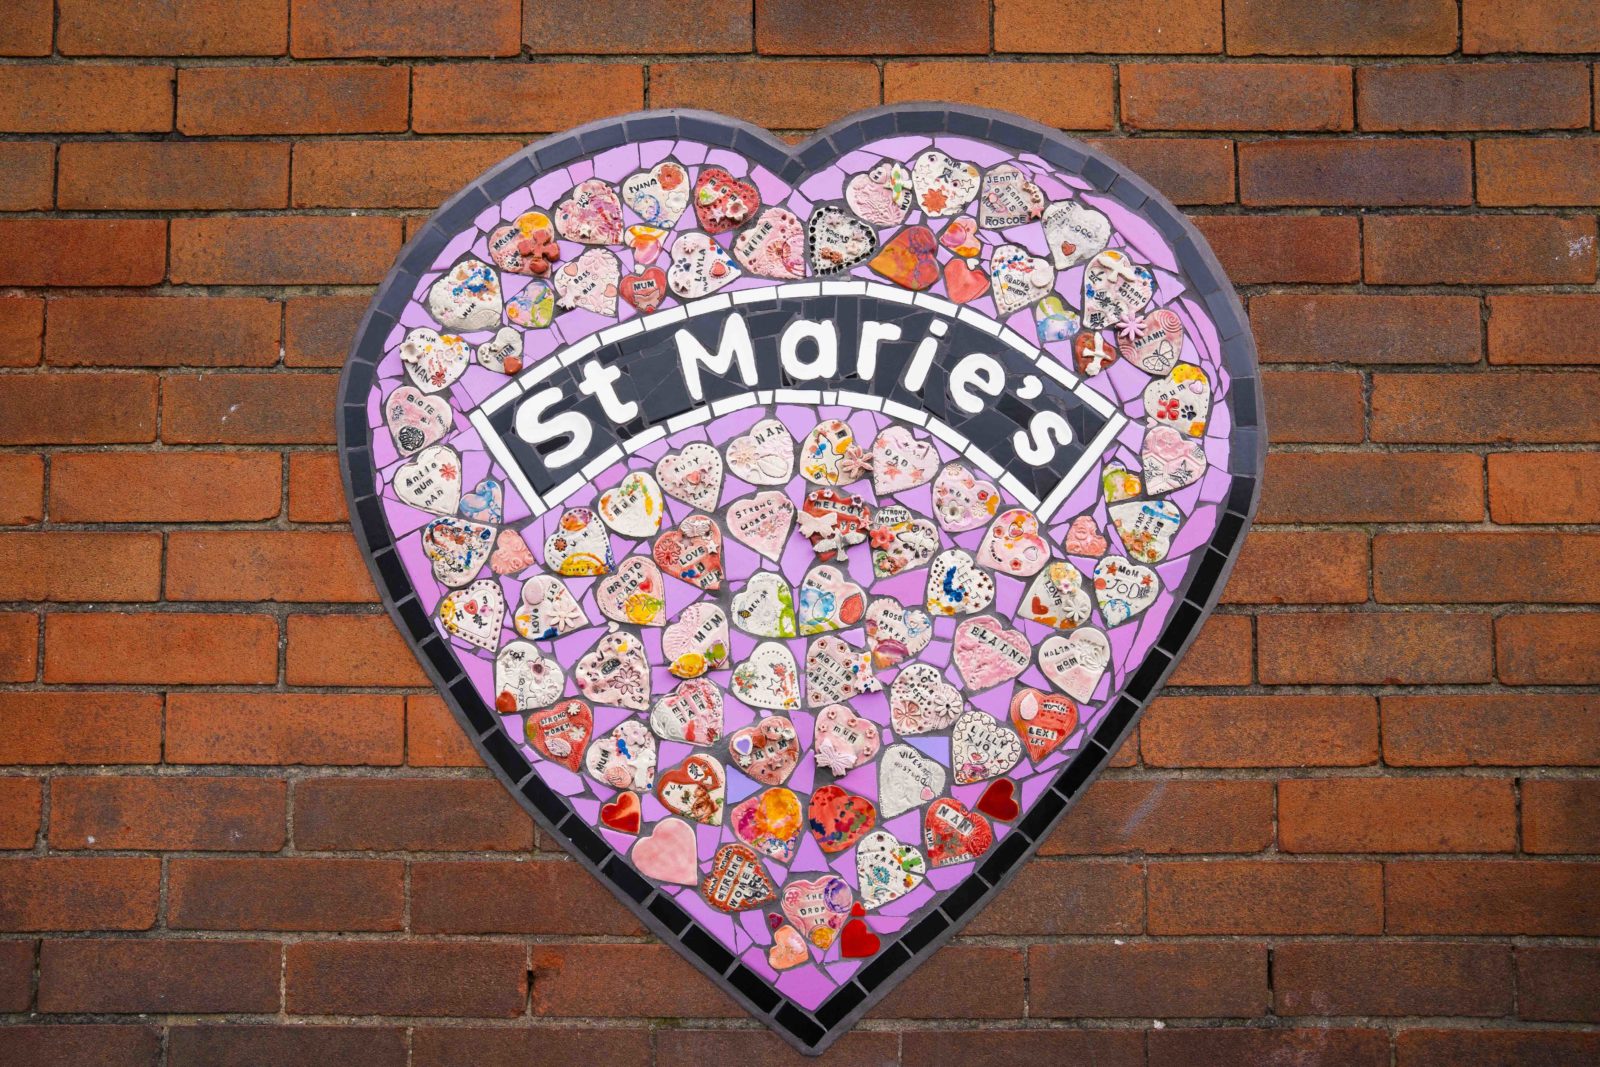 A heart shaped mosaic is cemented to a red brick wall. It has a lilac background and is filled with heart shaped tiles with names, words and decorations on them. In the middle it reads ‘St Marie’s’ in an arc shape with a black background and white letters.